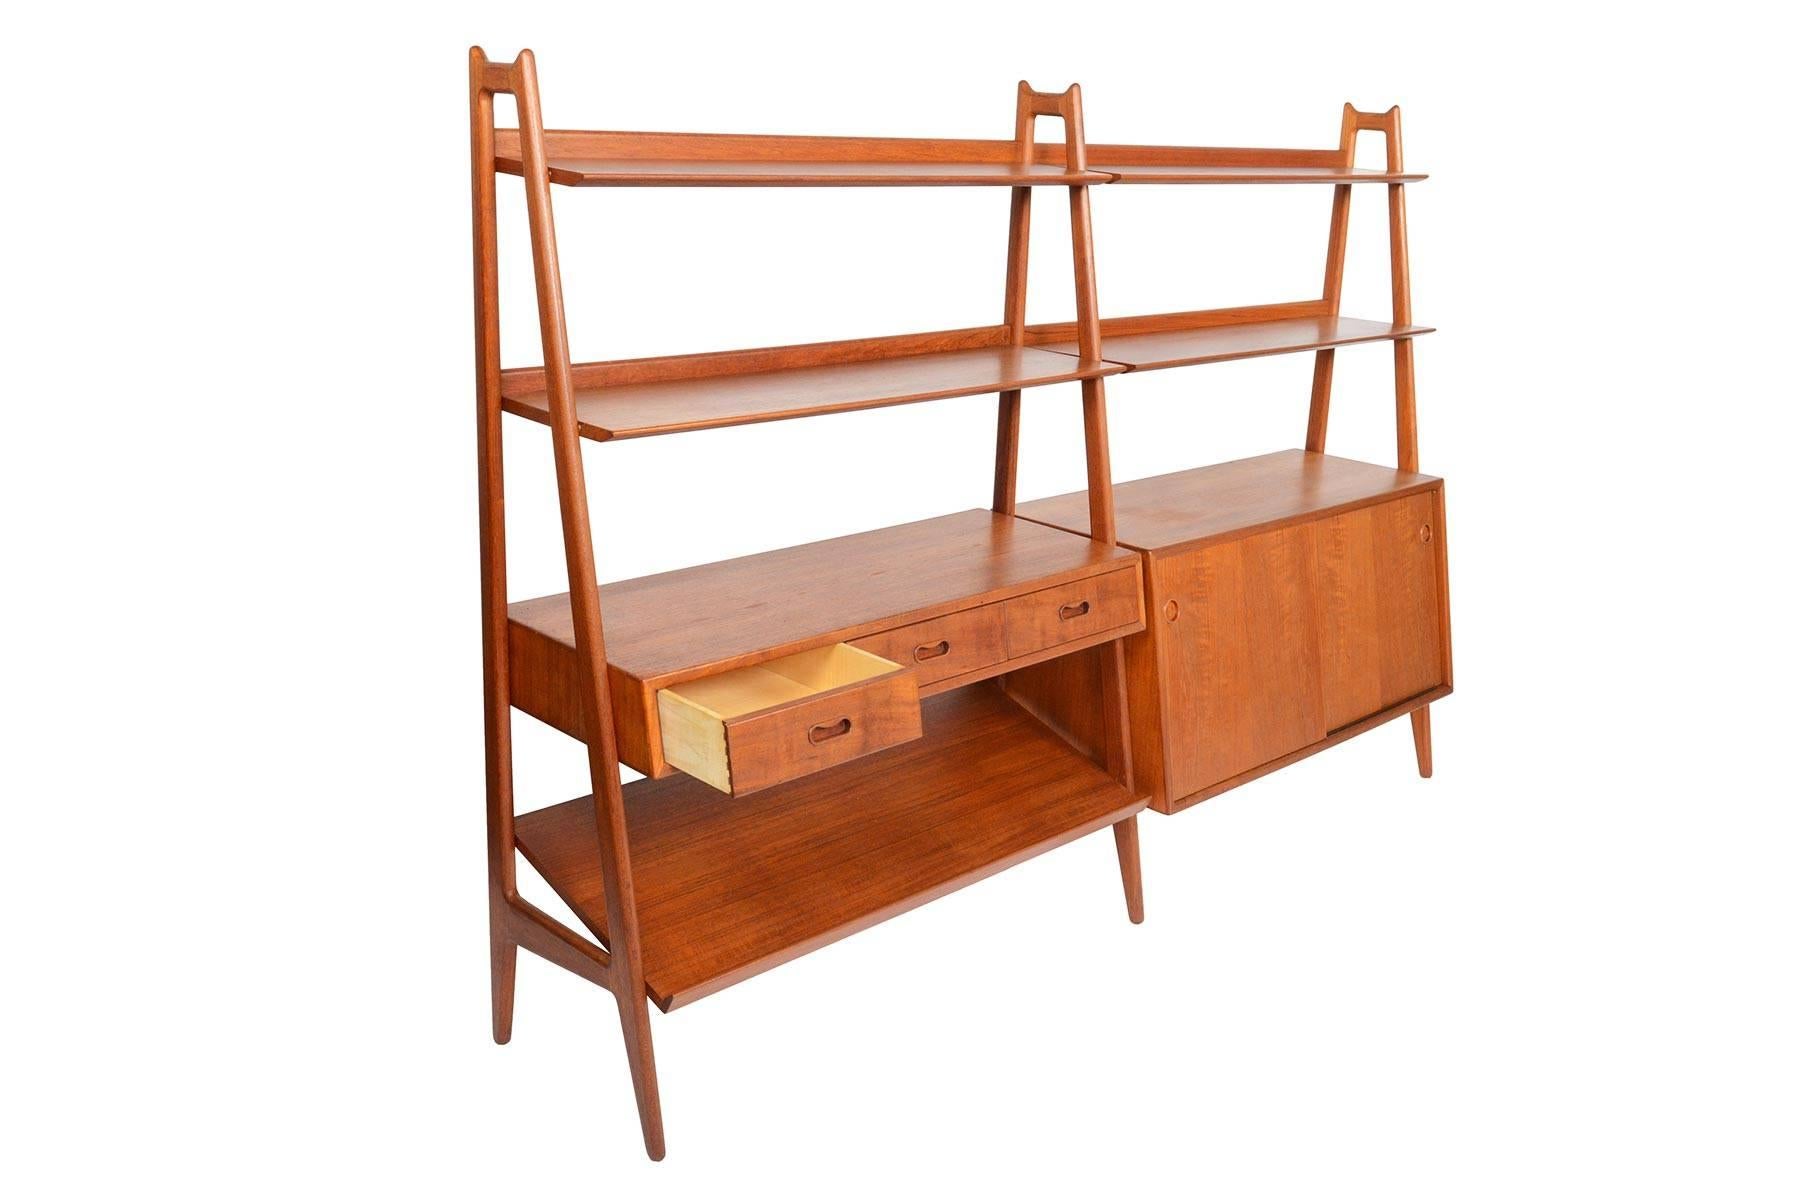 This Danish modern freestanding bookcase in teak was the product of a collaboration between Arne Vodder and Anton Borg for Vamo Sønderborg in the 1950s. This two bay design stands on three, beautifully joined a- frames. Four shelves with lipped